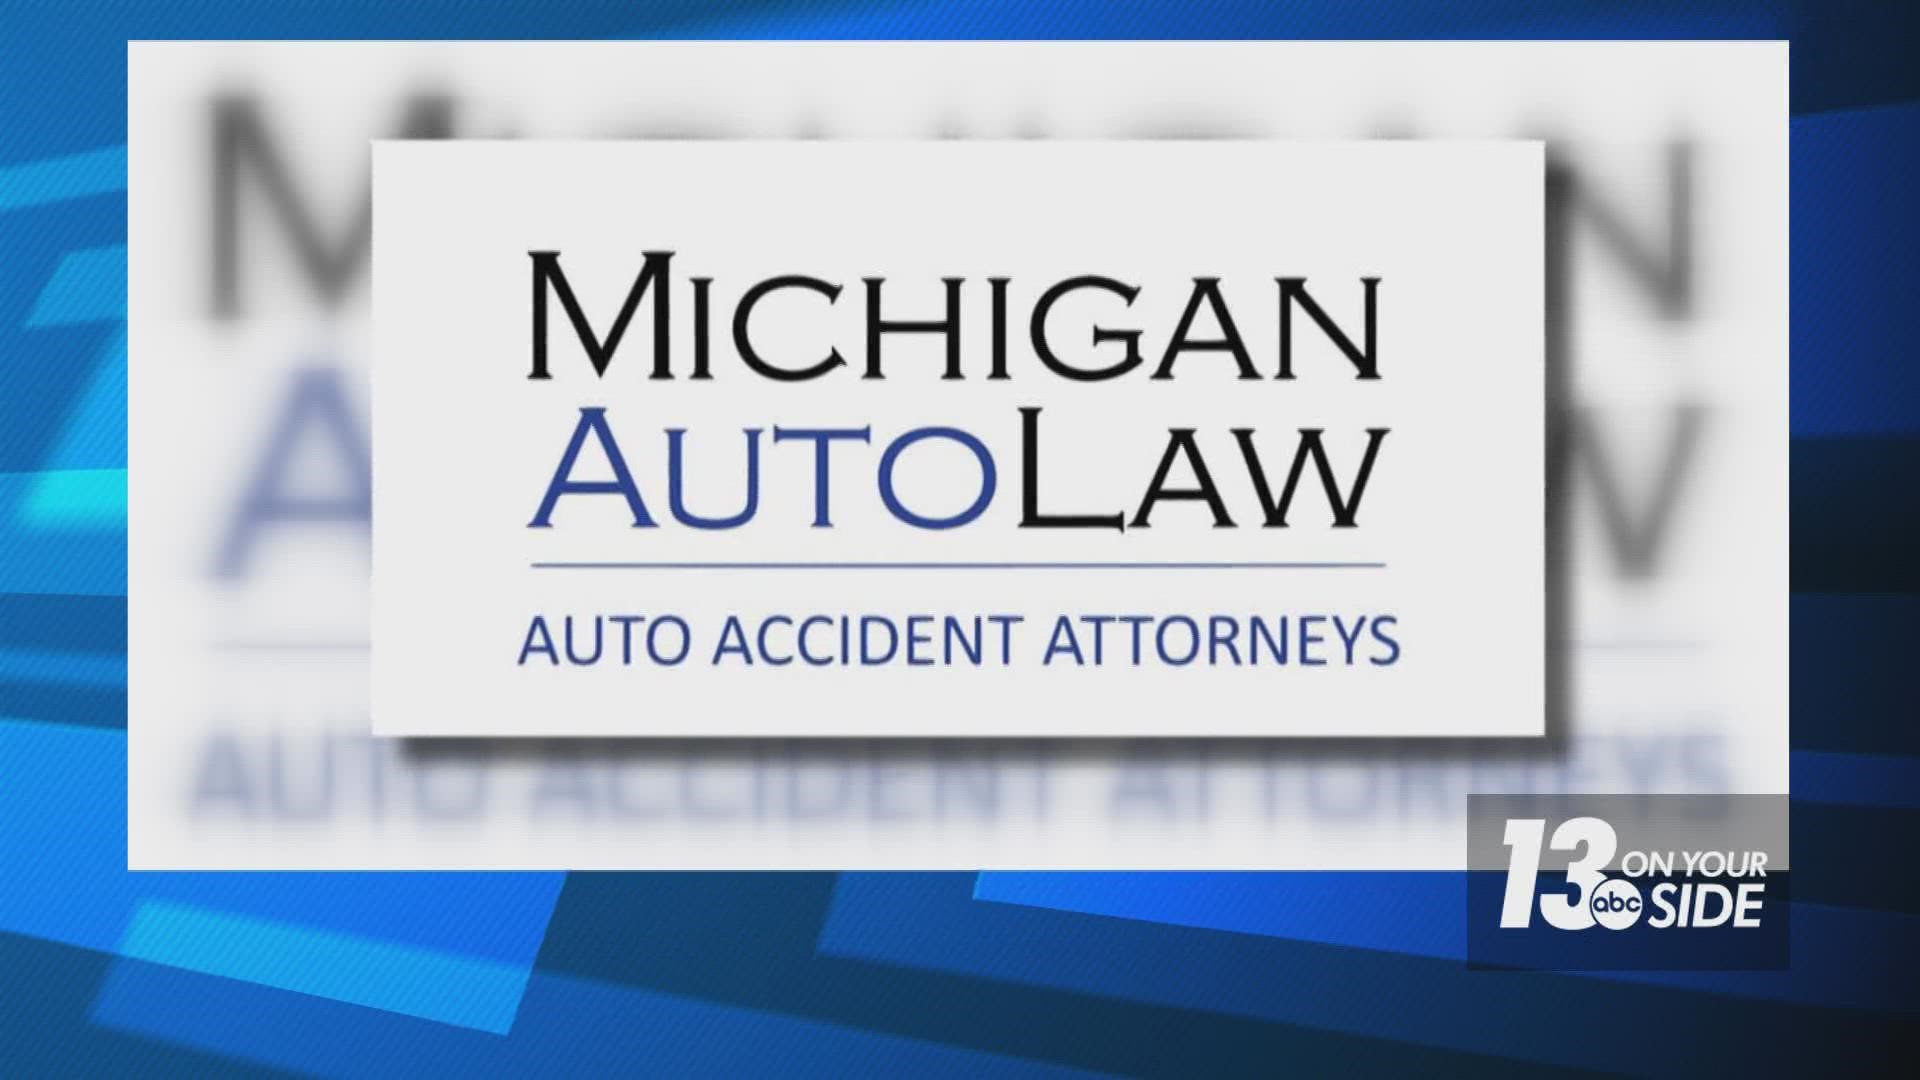 Brandon Hewitt is an attorney with Michigan Auto Law and he joined us to share some fairly concerning statistics around the Thanksgiving travel weekend.